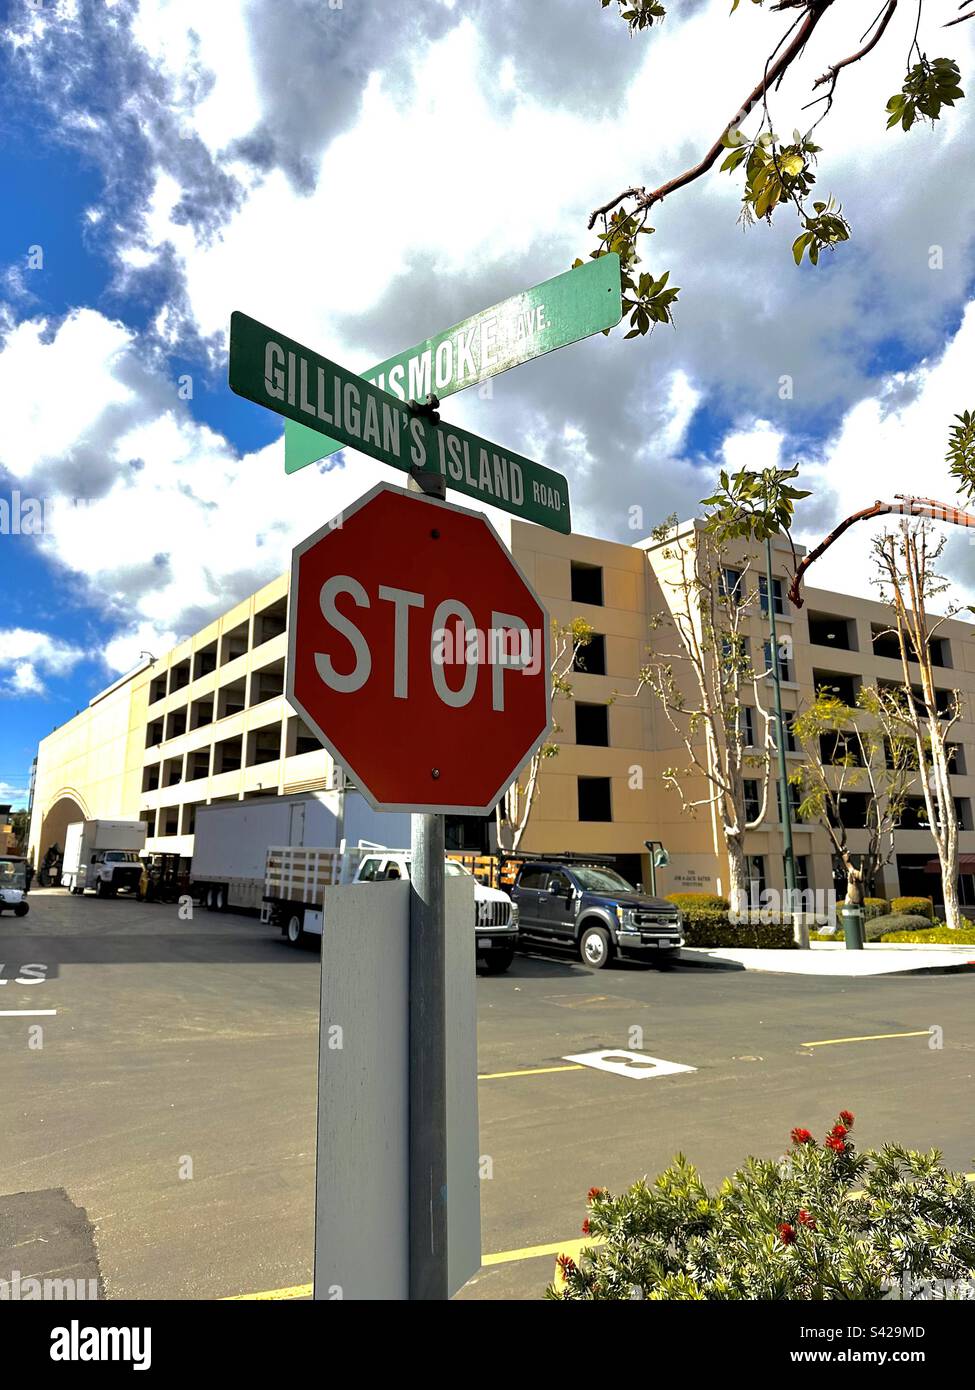 The intersection of Gilligan’s Island Road and Gunsmoke Avenue at CBS Studio Center (a.k.a. Radford Studio Center, and CBS Radford) in the Studio City district of Los Angeles, California. Stock Photo